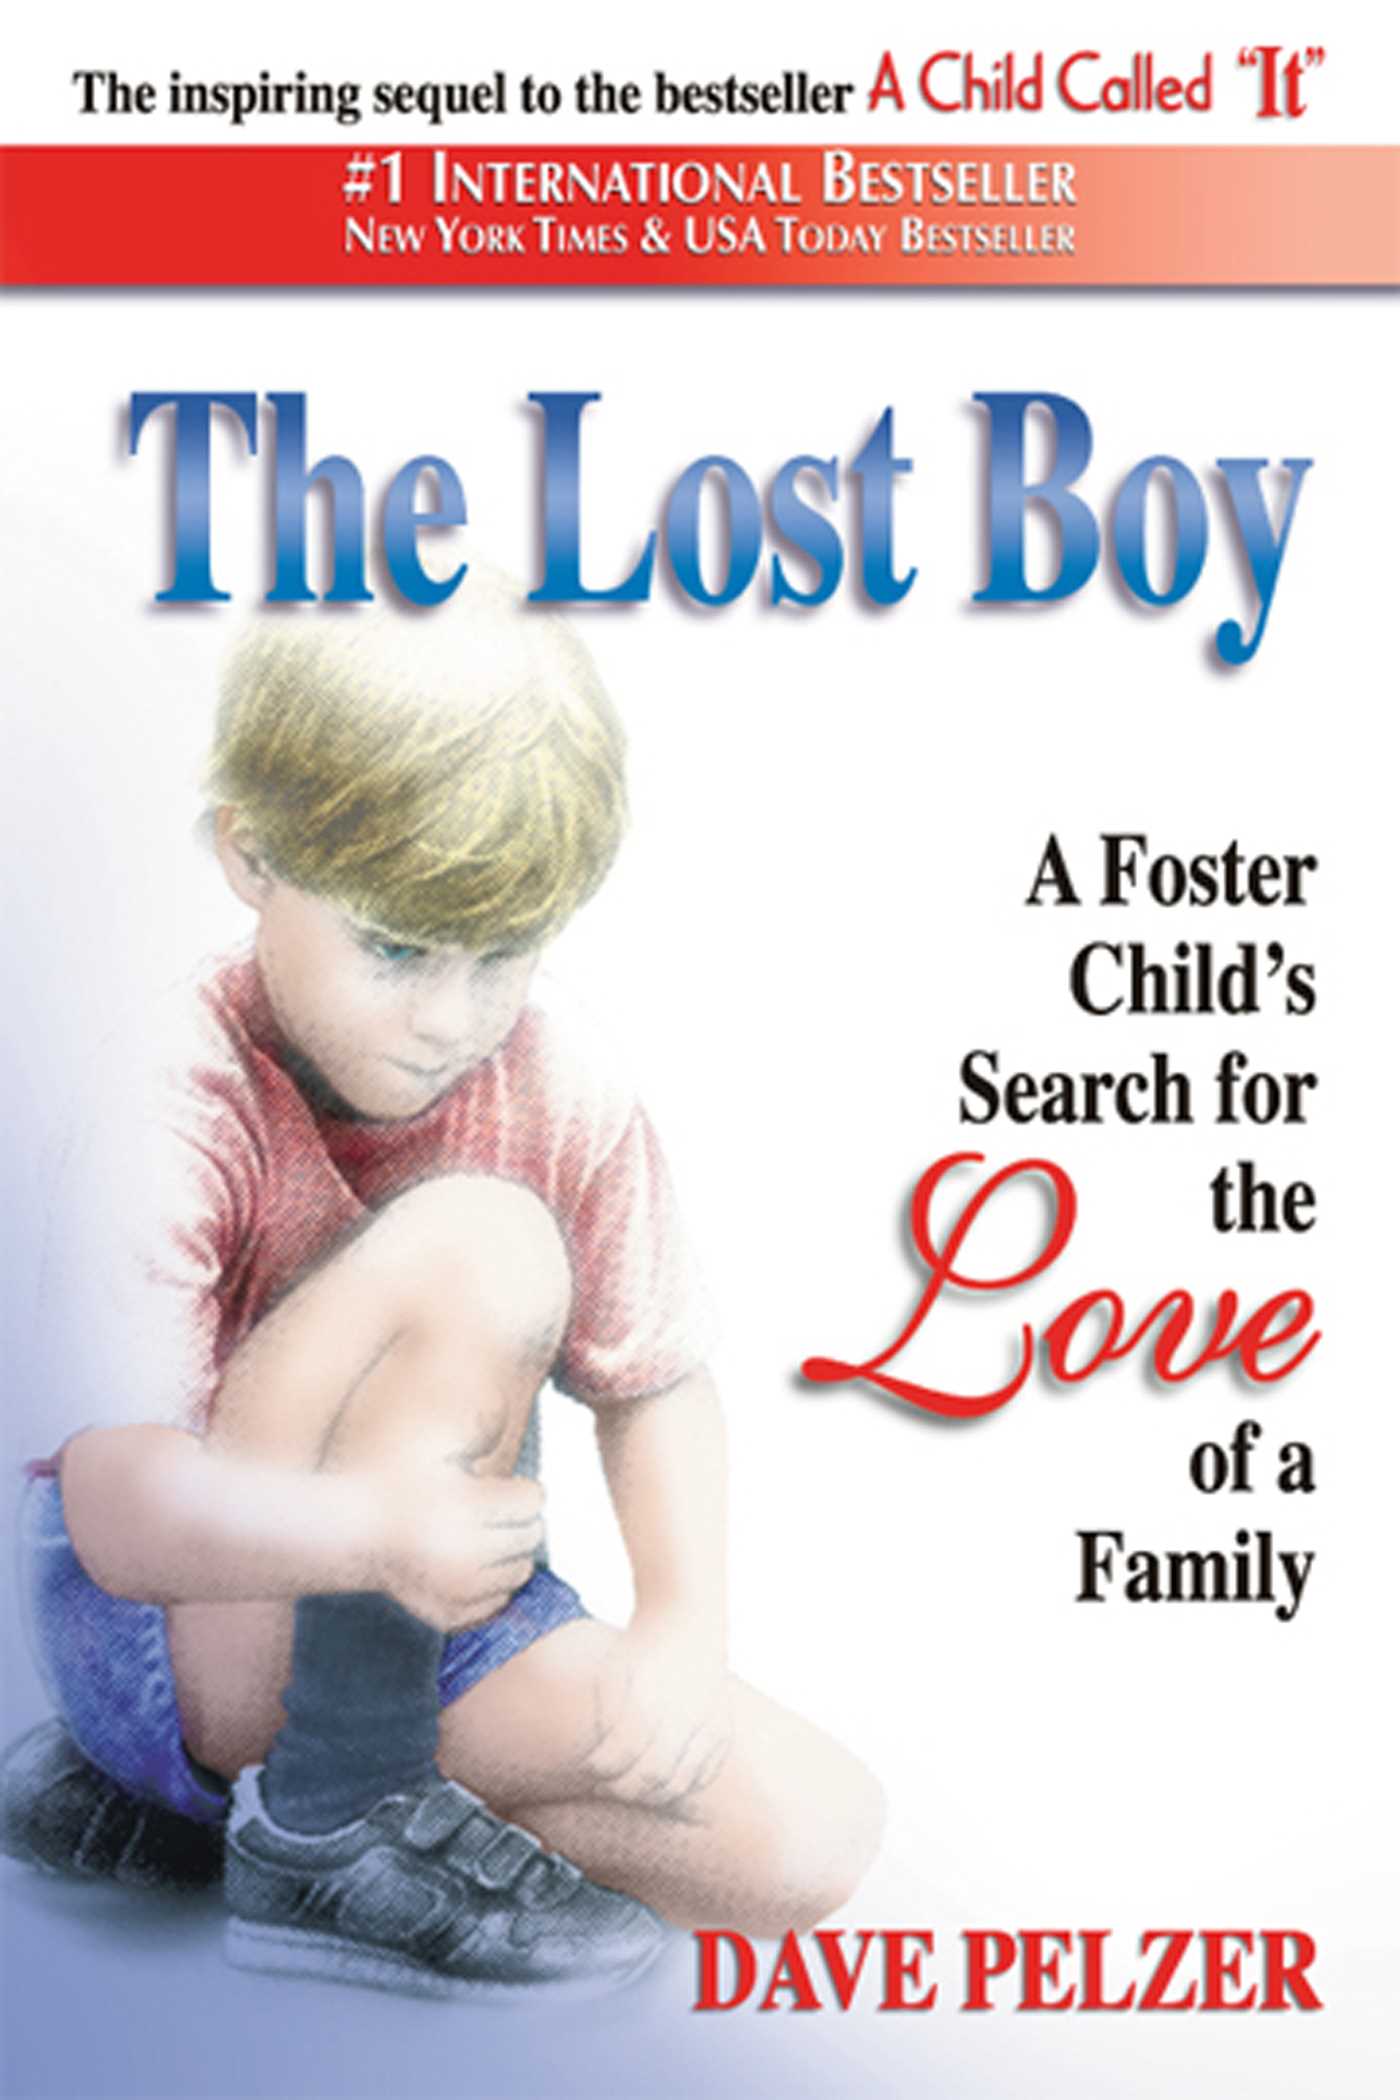 The Lost Boy - 10-14.99